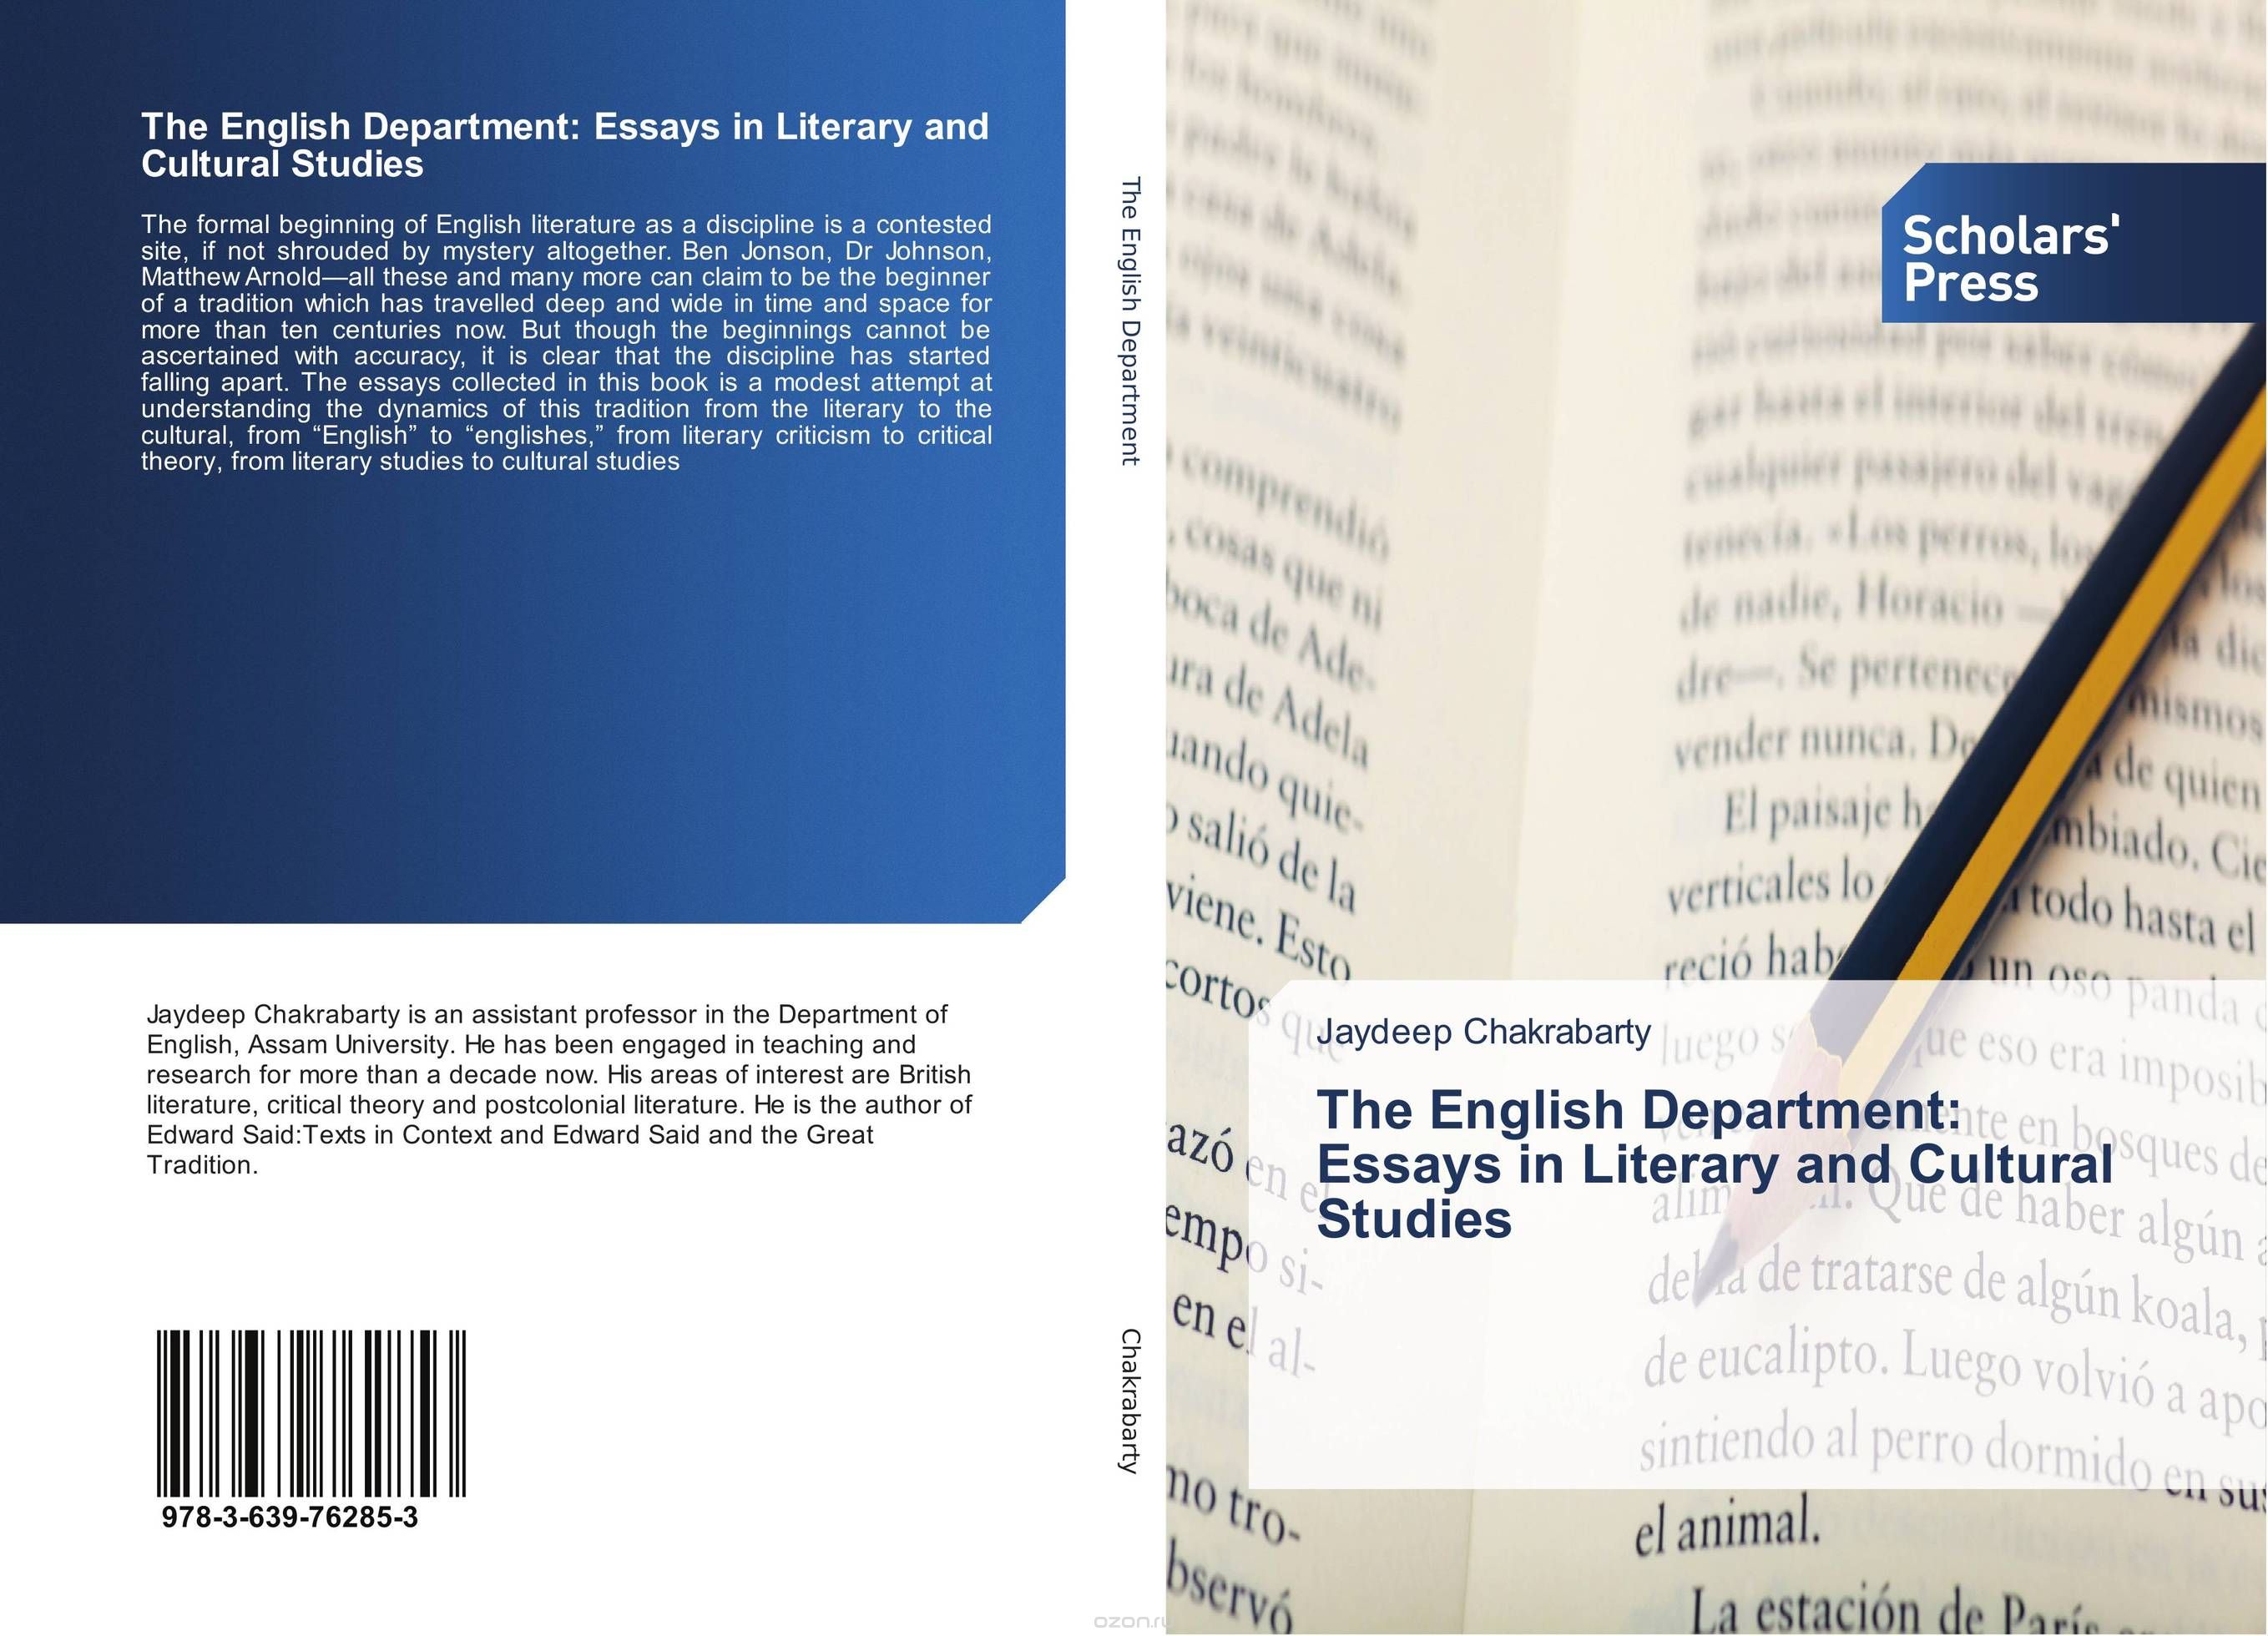 Скачать книгу "The English Department: Essays in Literary and Cultural Studies"